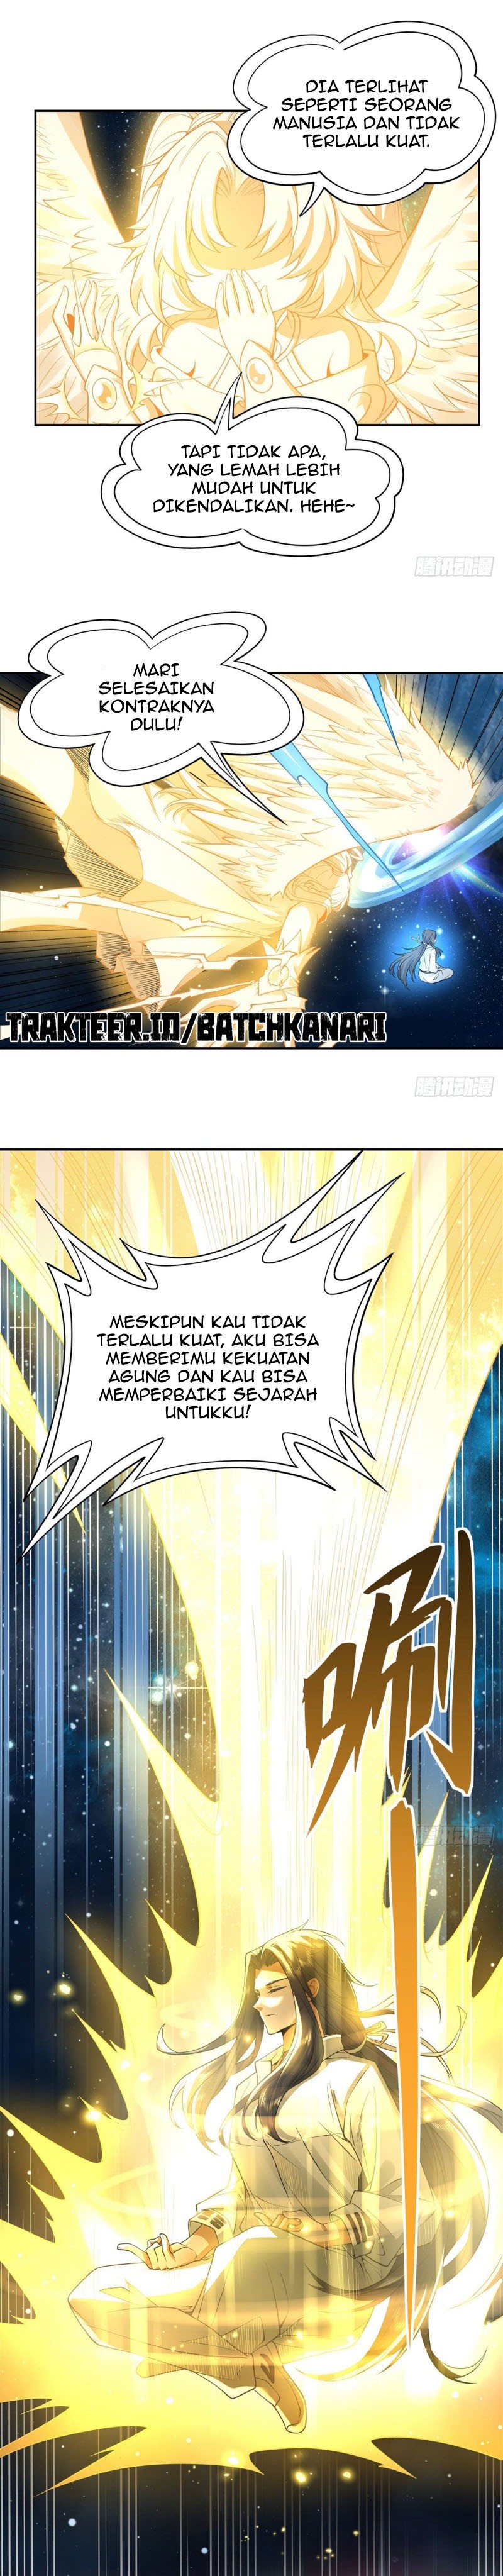 Dilarang COPAS - situs resmi www.mangacanblog.com - Komik my female apprentices are all big shots from the future 000 - chapter 0 1 Indonesia my female apprentices are all big shots from the future 000 - chapter 0 Terbaru 10|Baca Manga Komik Indonesia|Mangacan